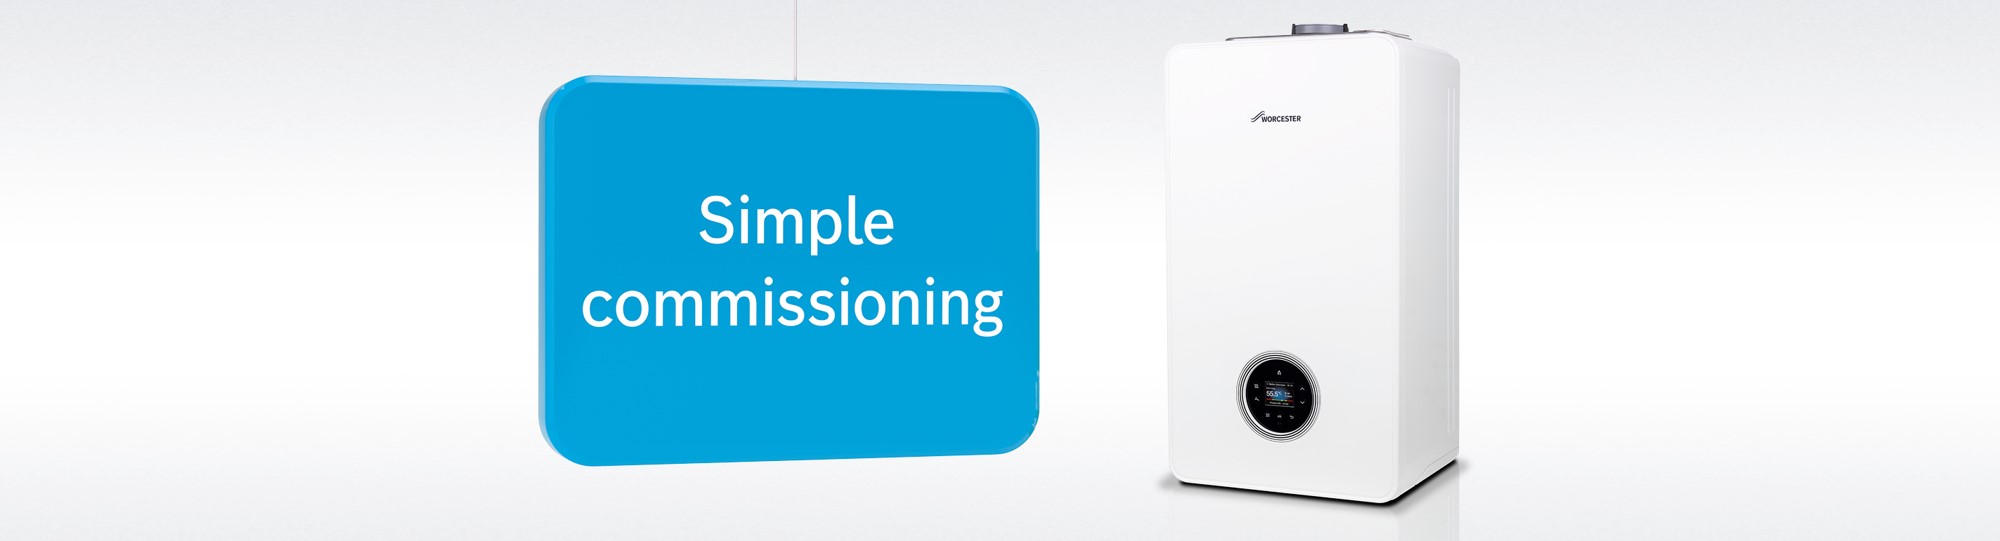 4000 boiler simple commissioning